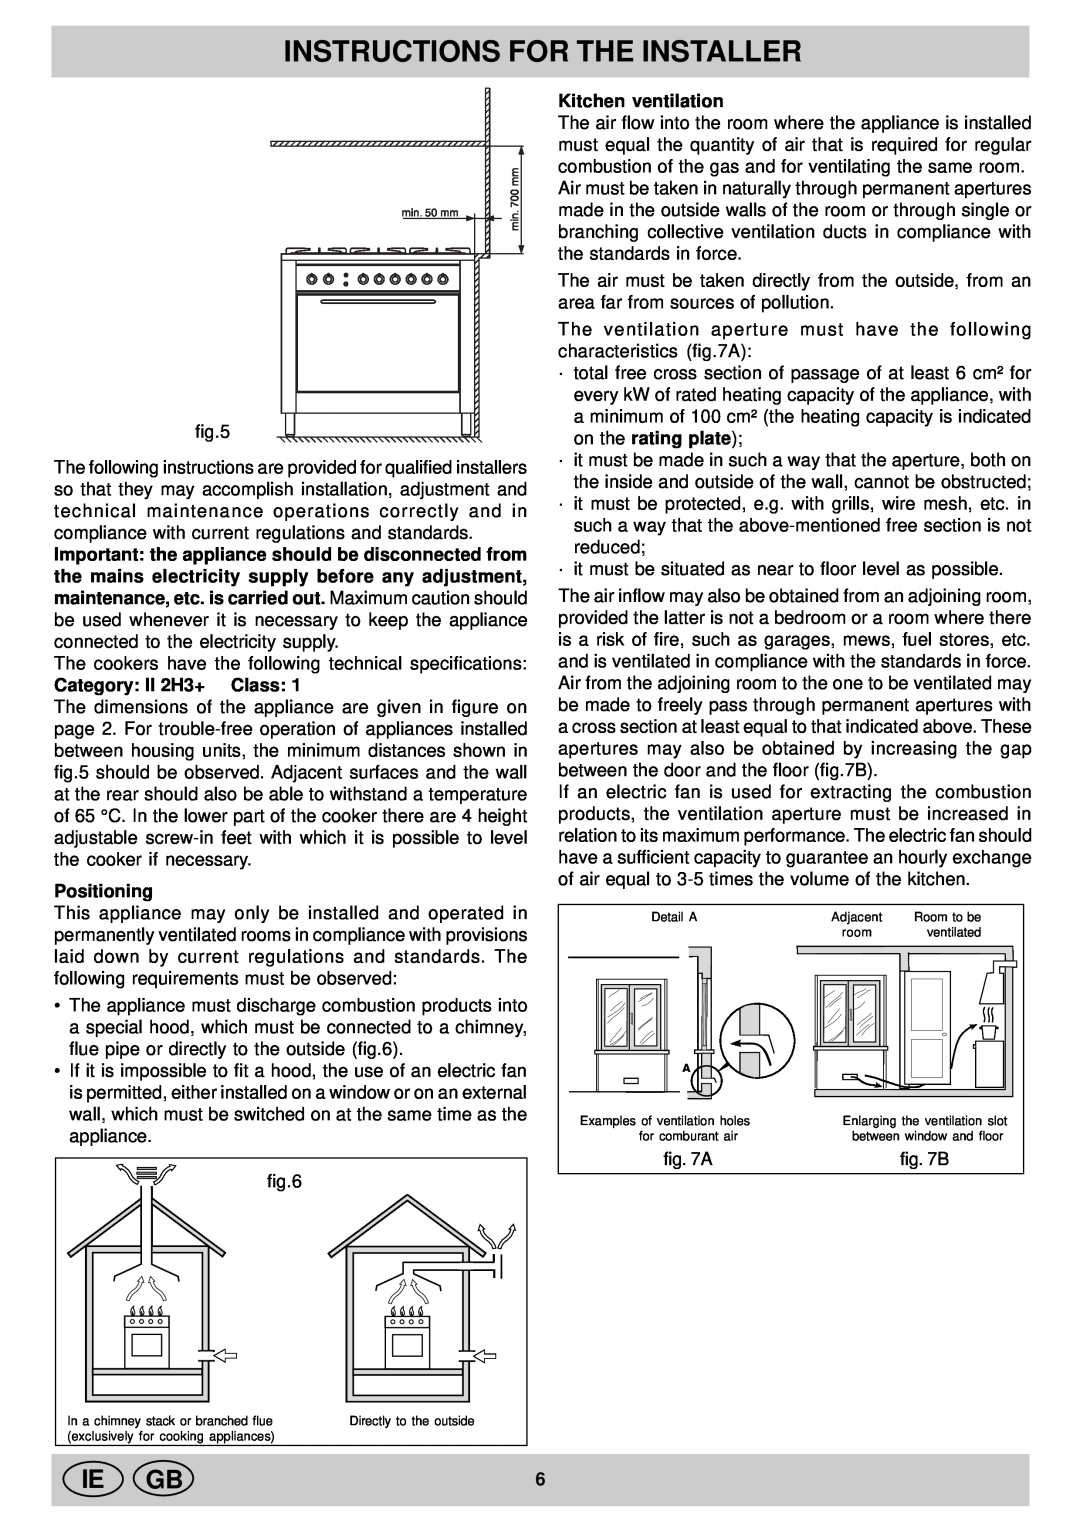 Indesit KP9507EB manual Instructions For The Installer, Ie Gb, Category II 2H3+ Class, Positioning, Kitchen ventilation 